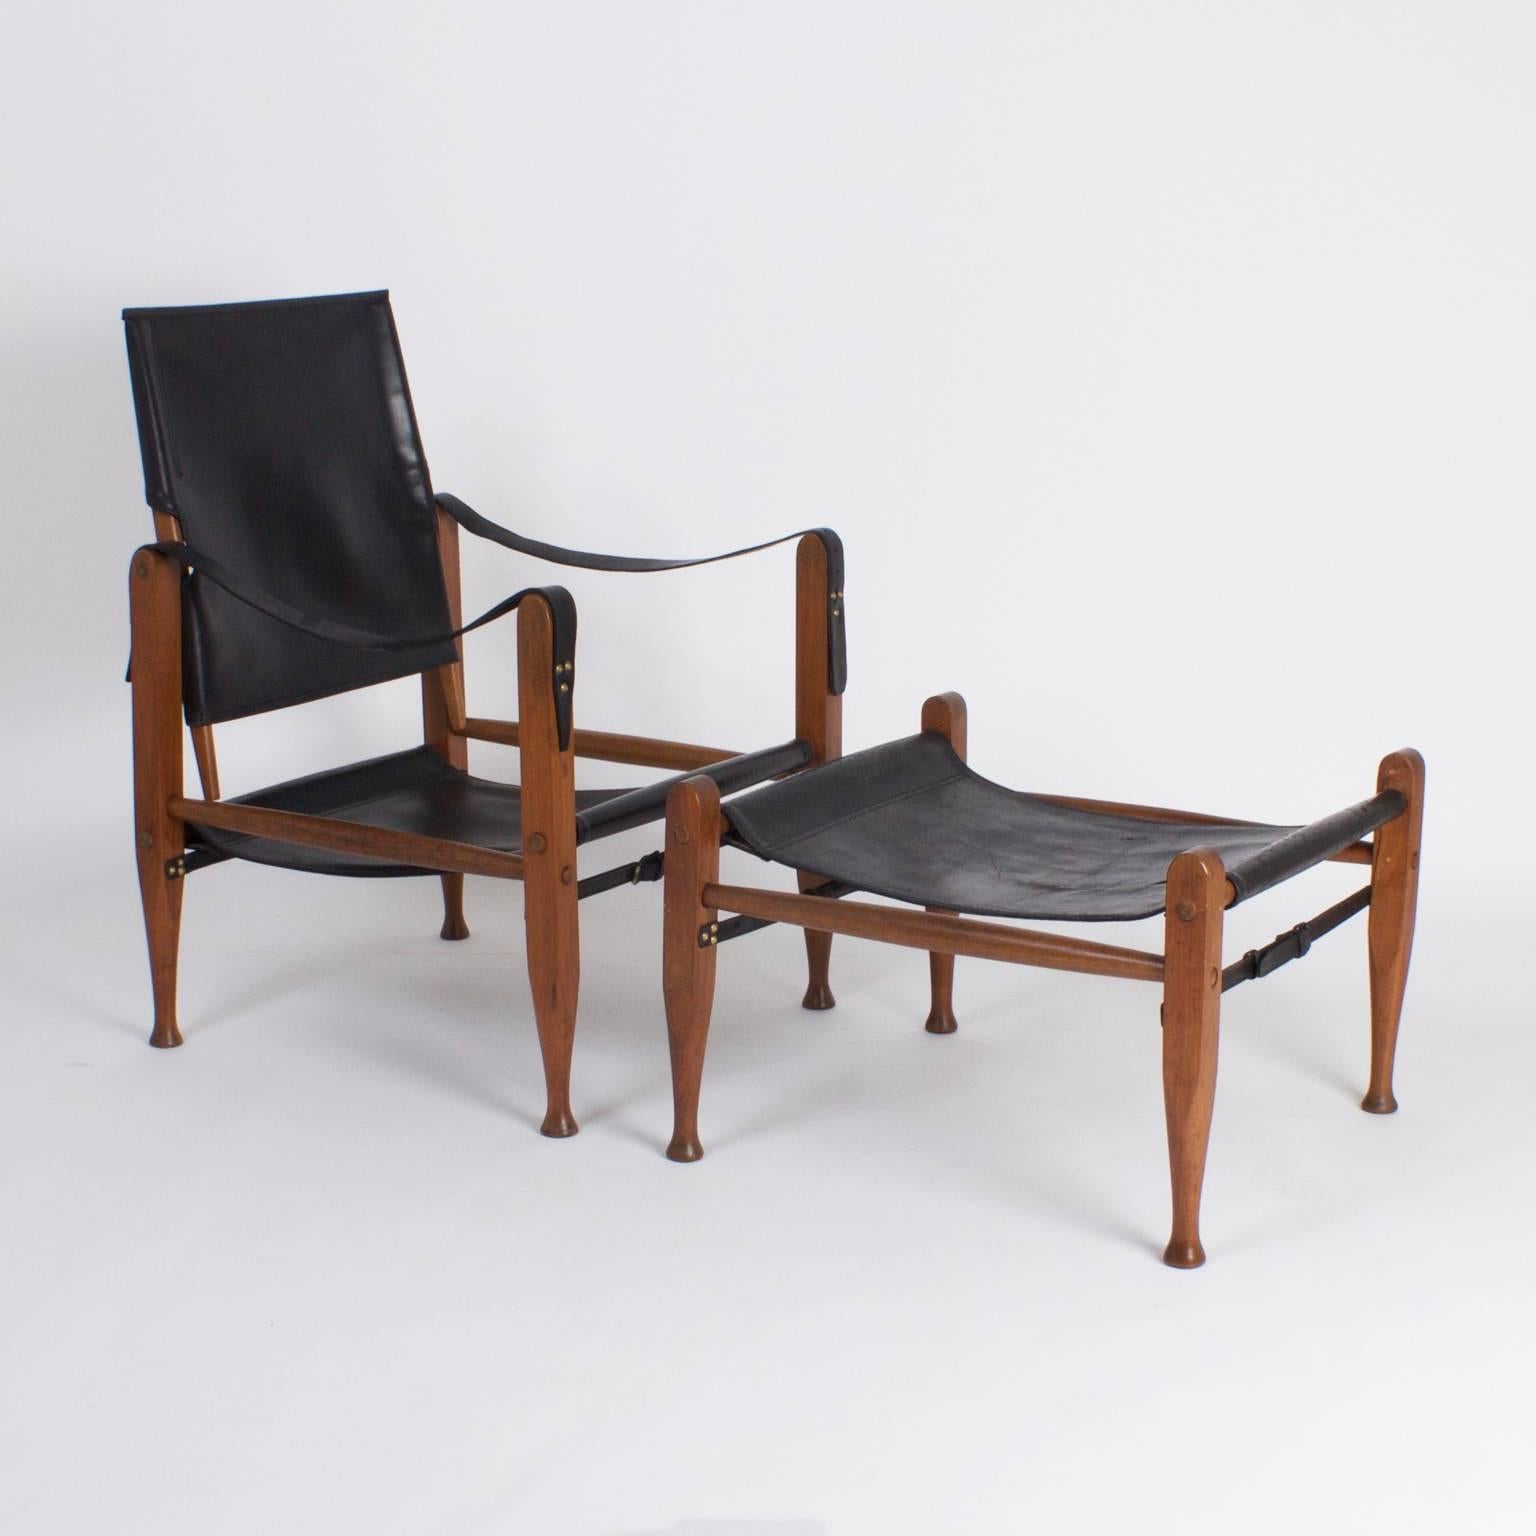 Dapper, Mid-Century safari chair and ottoman crafted with mahogany and soft black leather. Featuring swivel back, sling style seat and arms with elegant lines.

Measures: Chair: H 32, W 22, D 22, SH 13.

Ottoman: H 16, W 22, D 22.